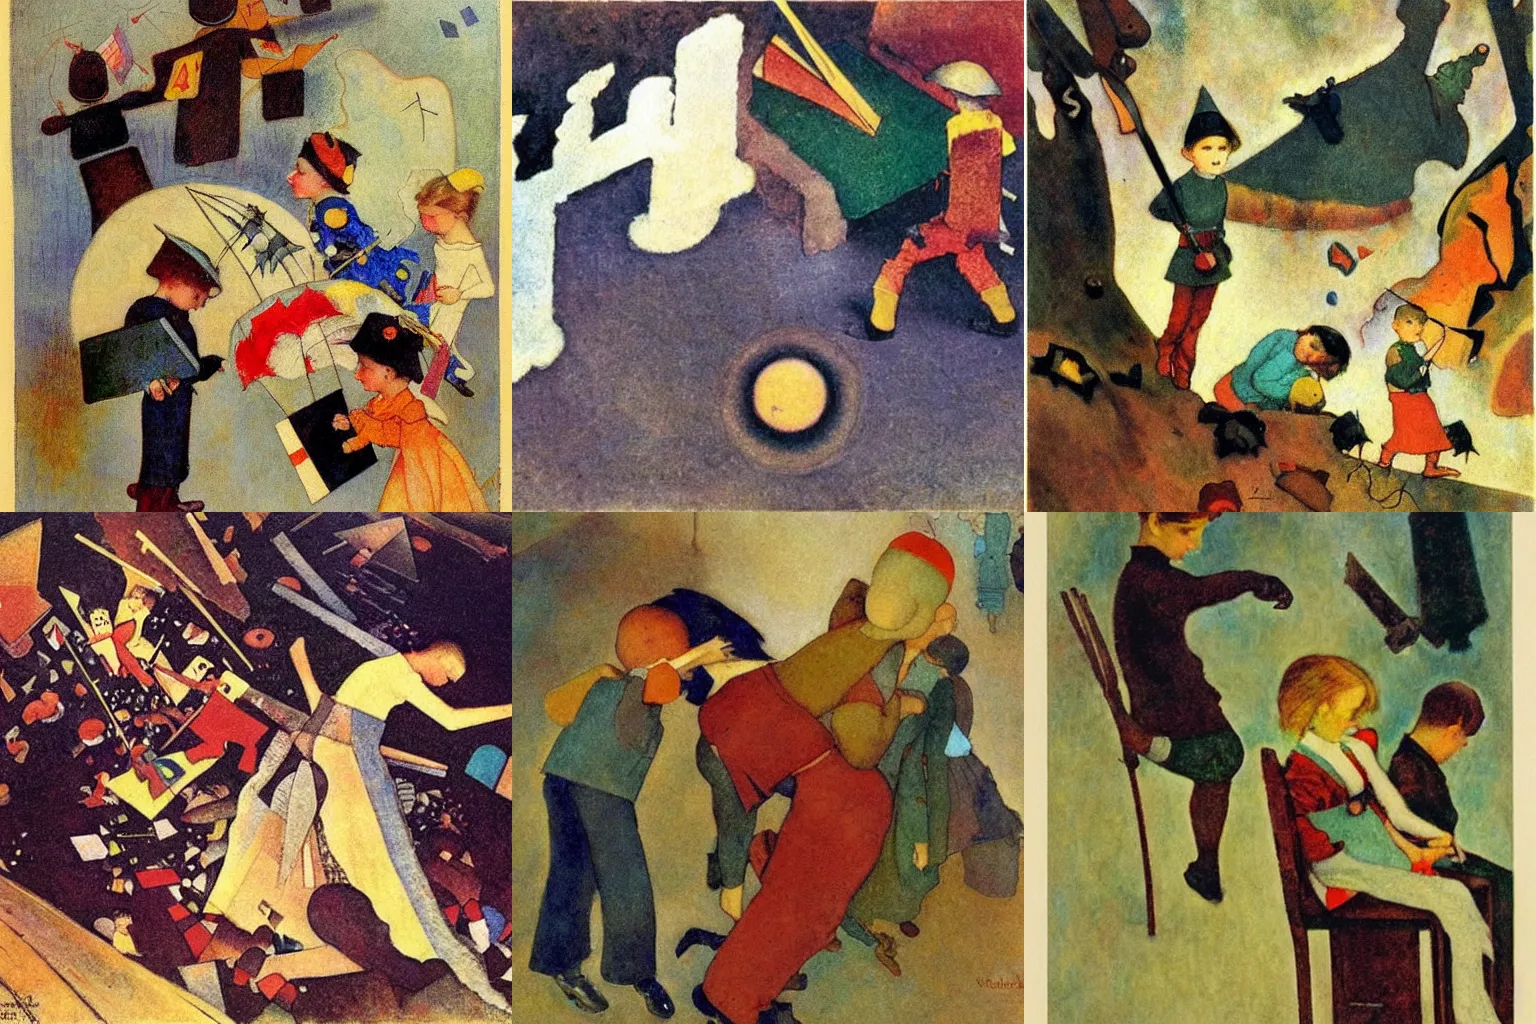 Prompt: a metaphor for the division and destruction of social order, painting by jessie willcox smith and wassily kandinsky